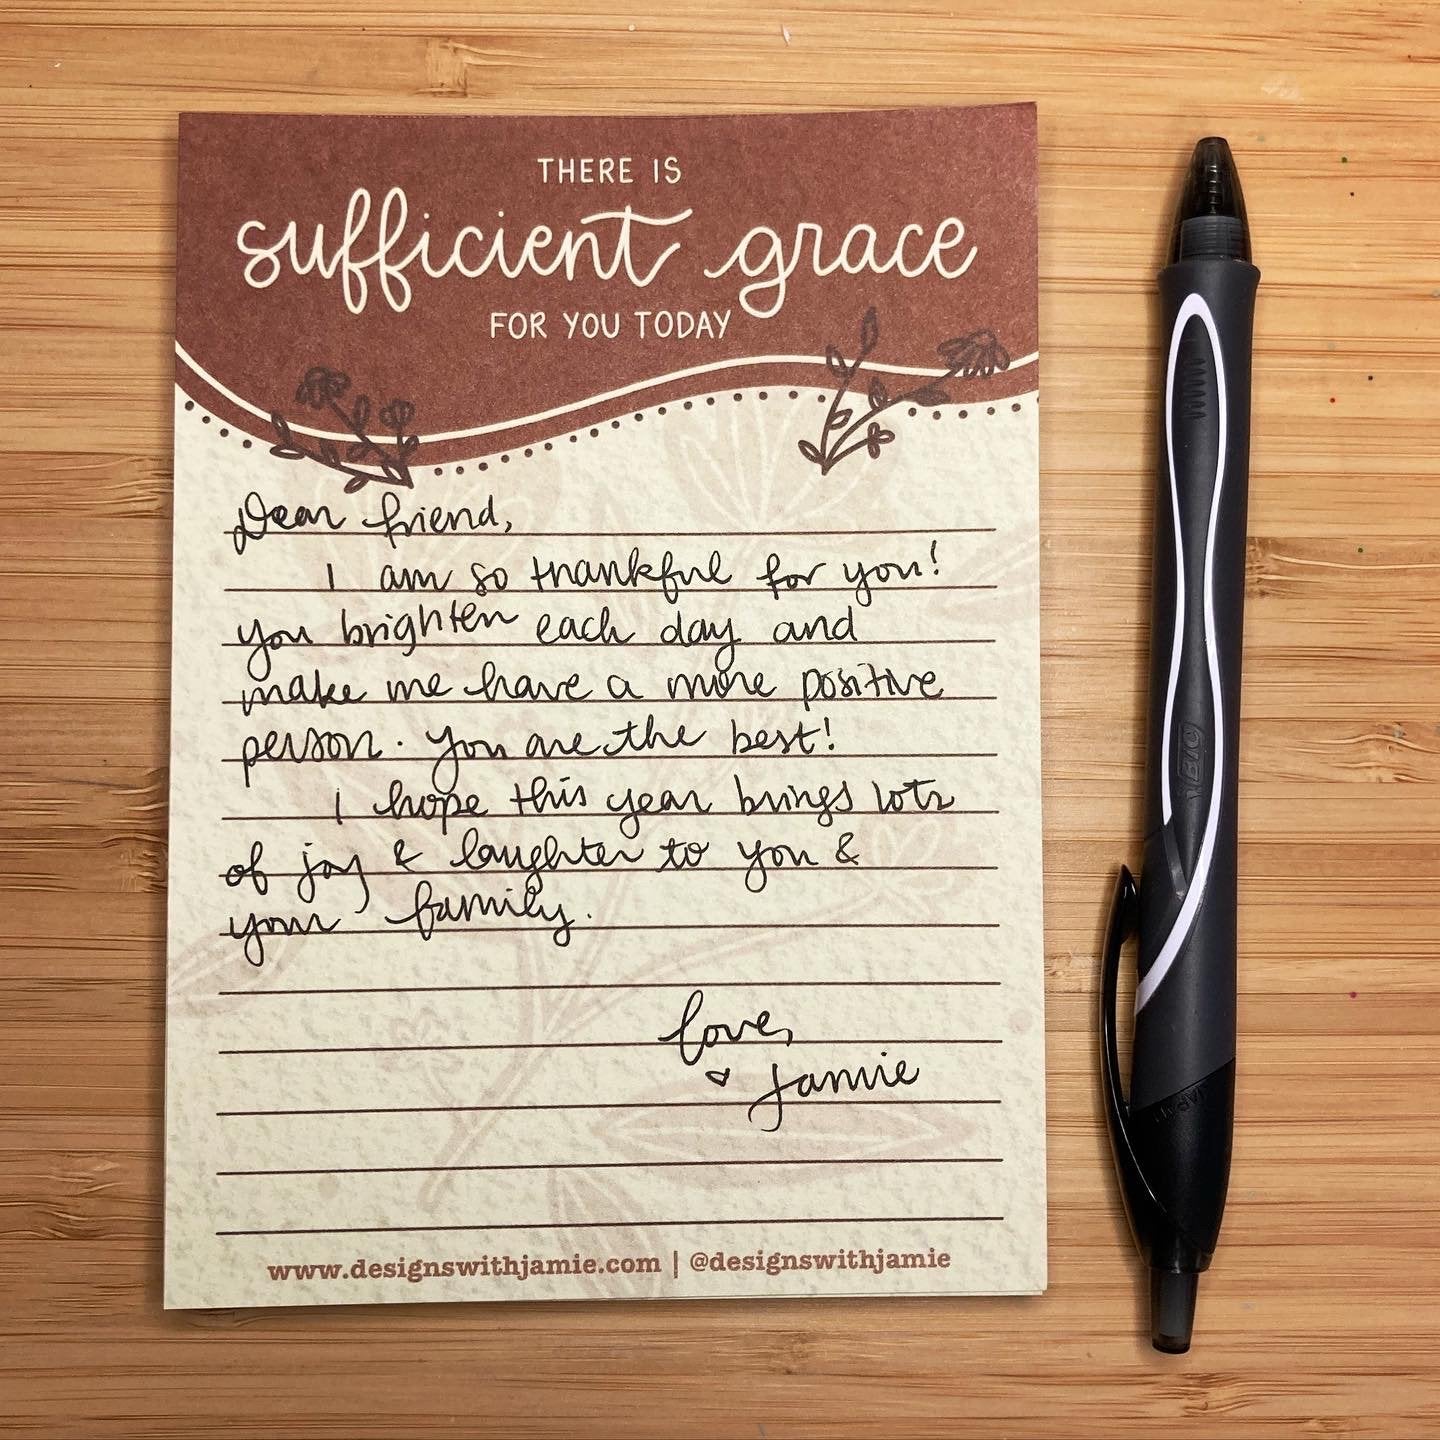 Sufficient Grace Notepad